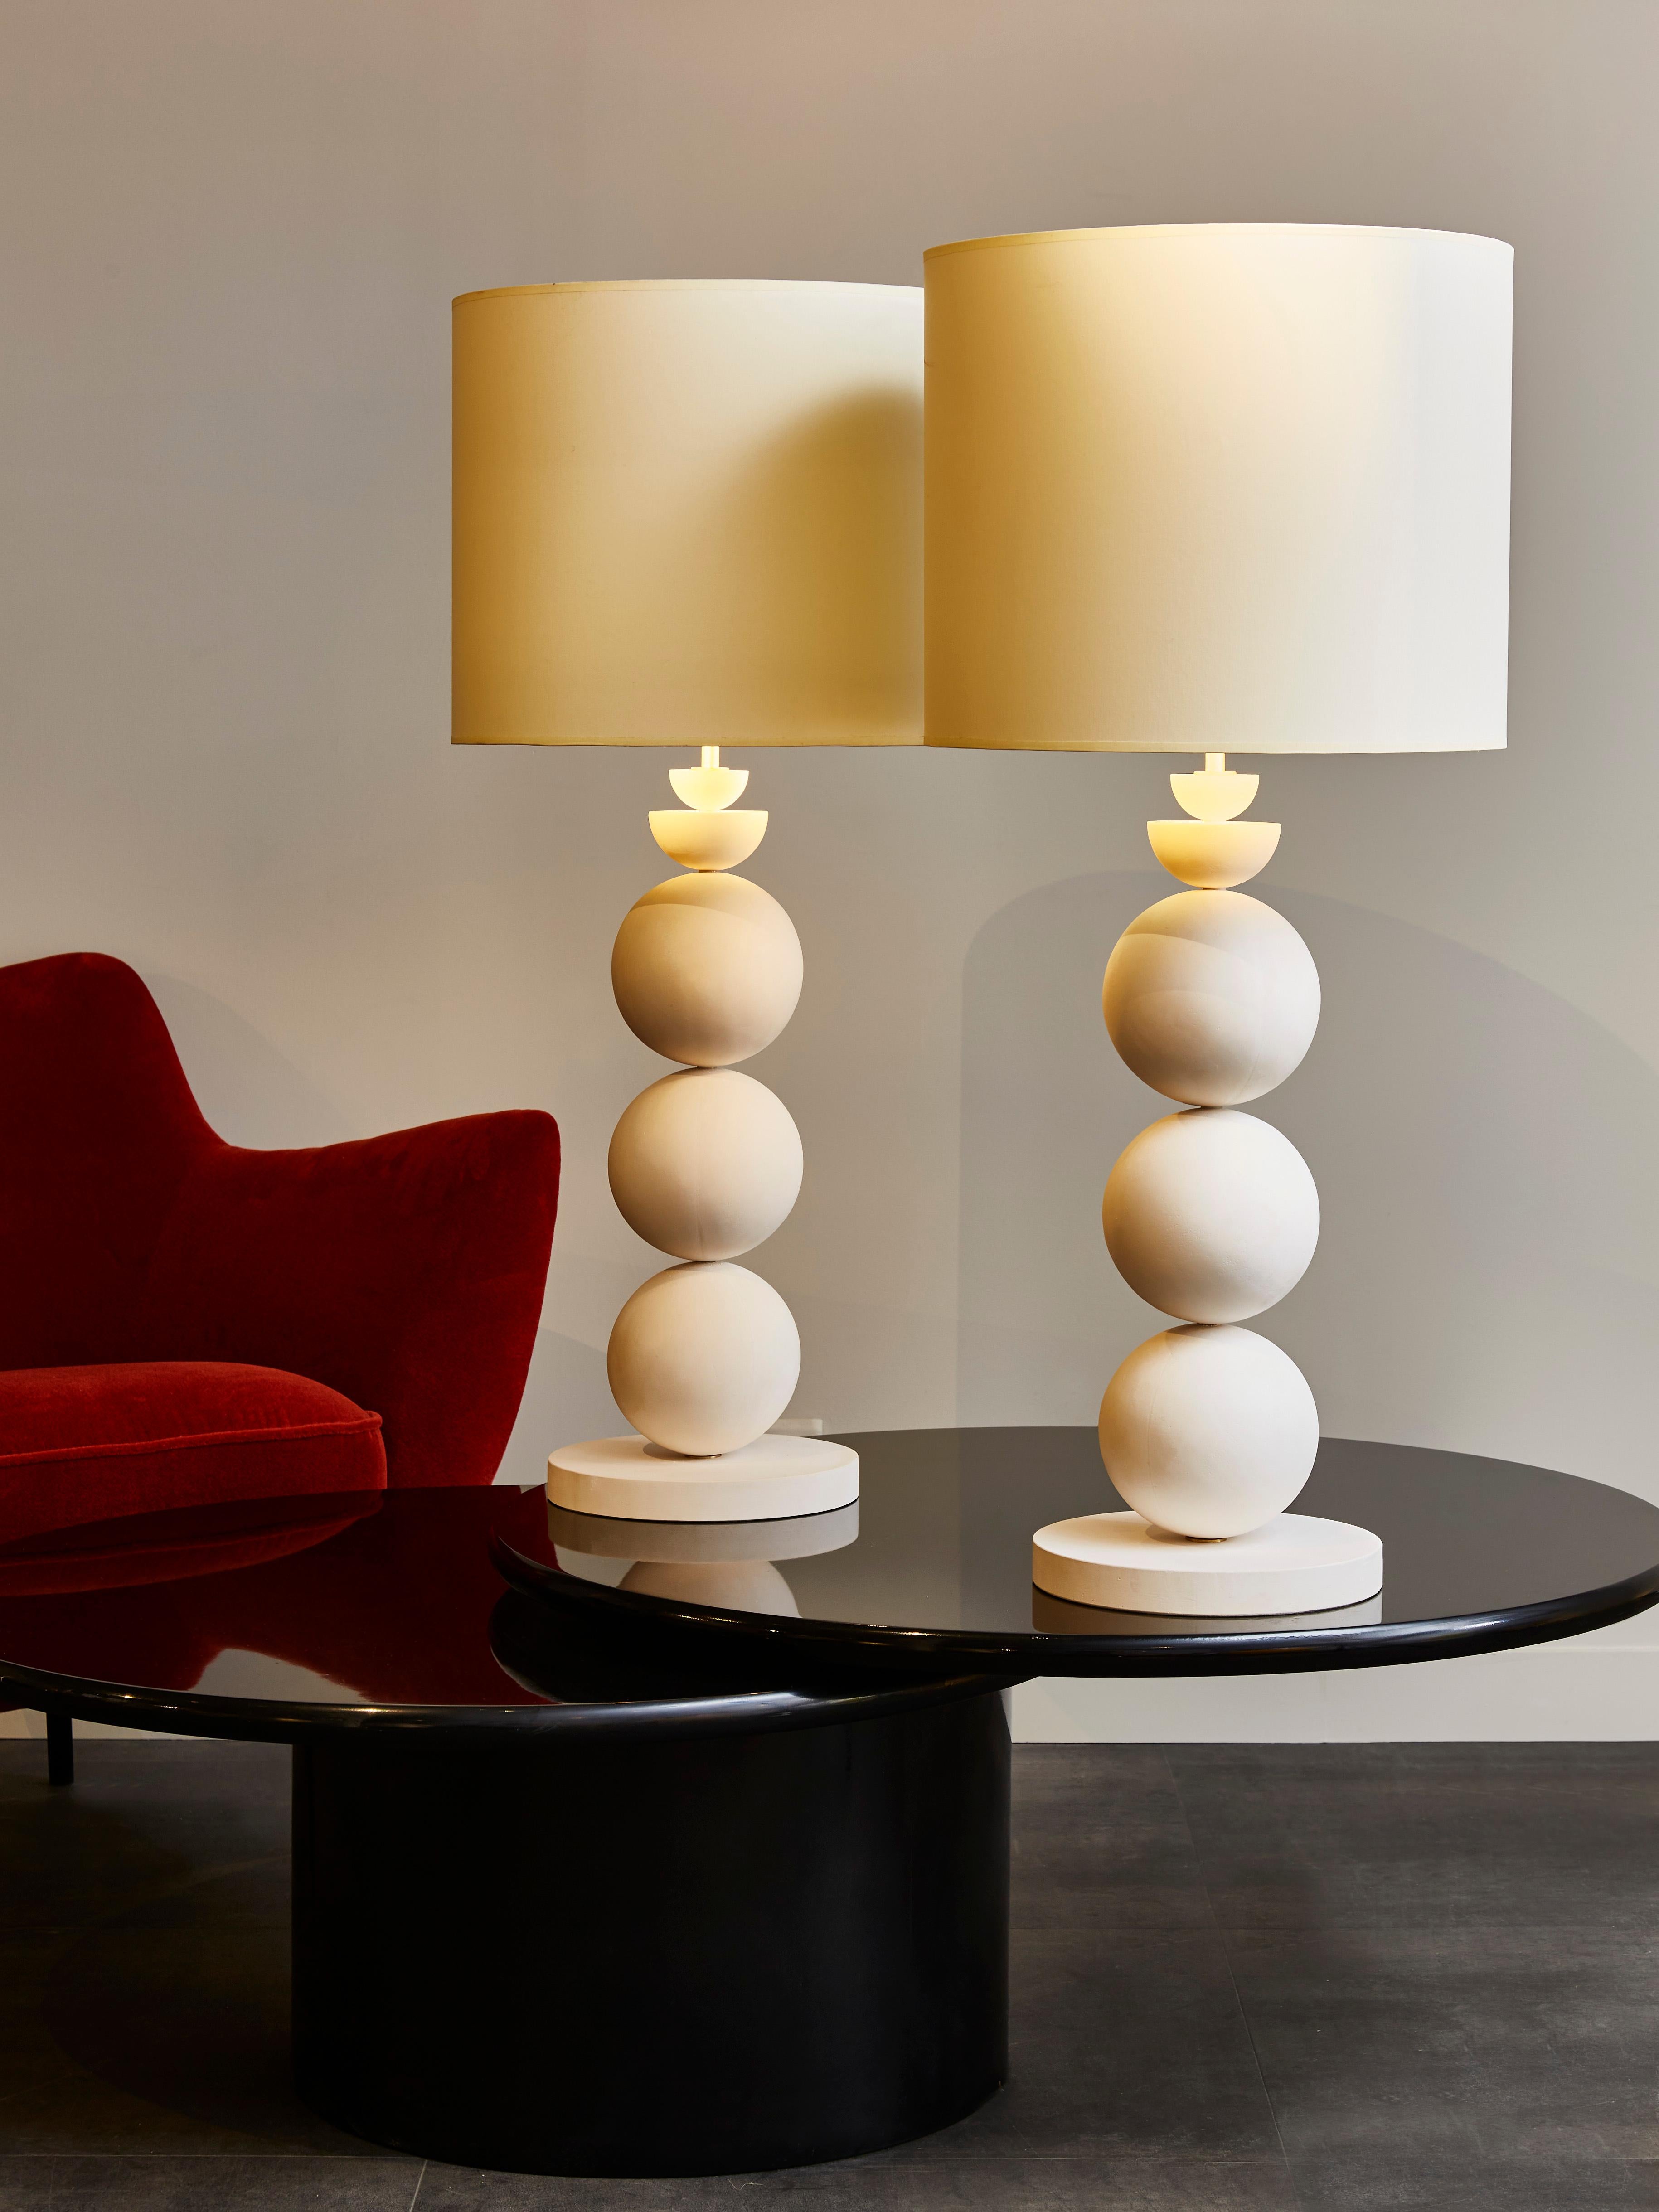 Pair of elegant table lamps made of stacked plaster globes.

 